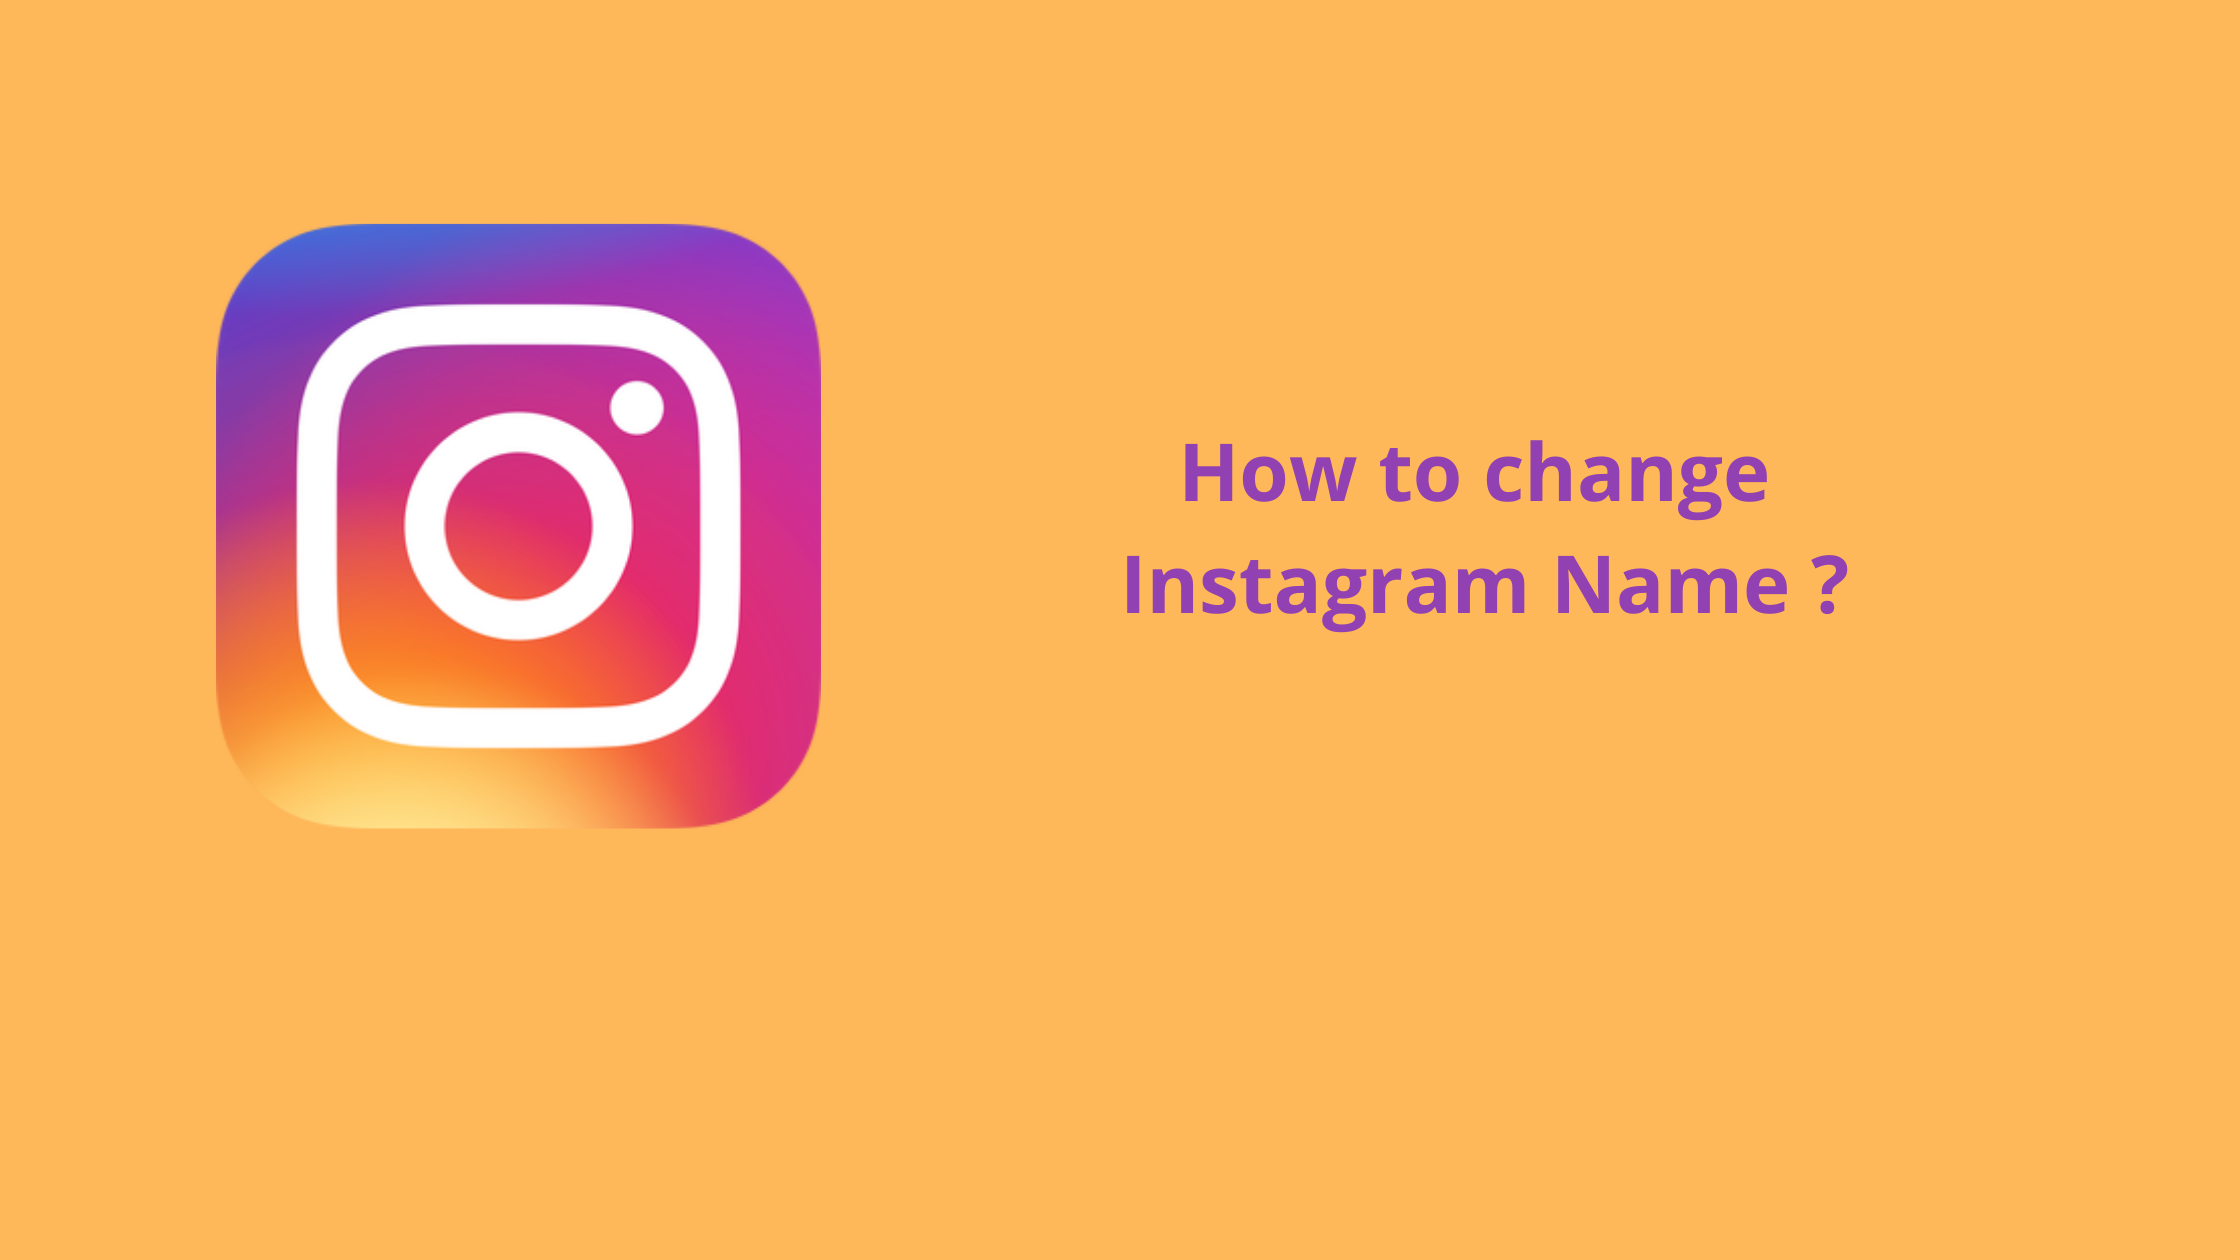 How to change Instagram Name